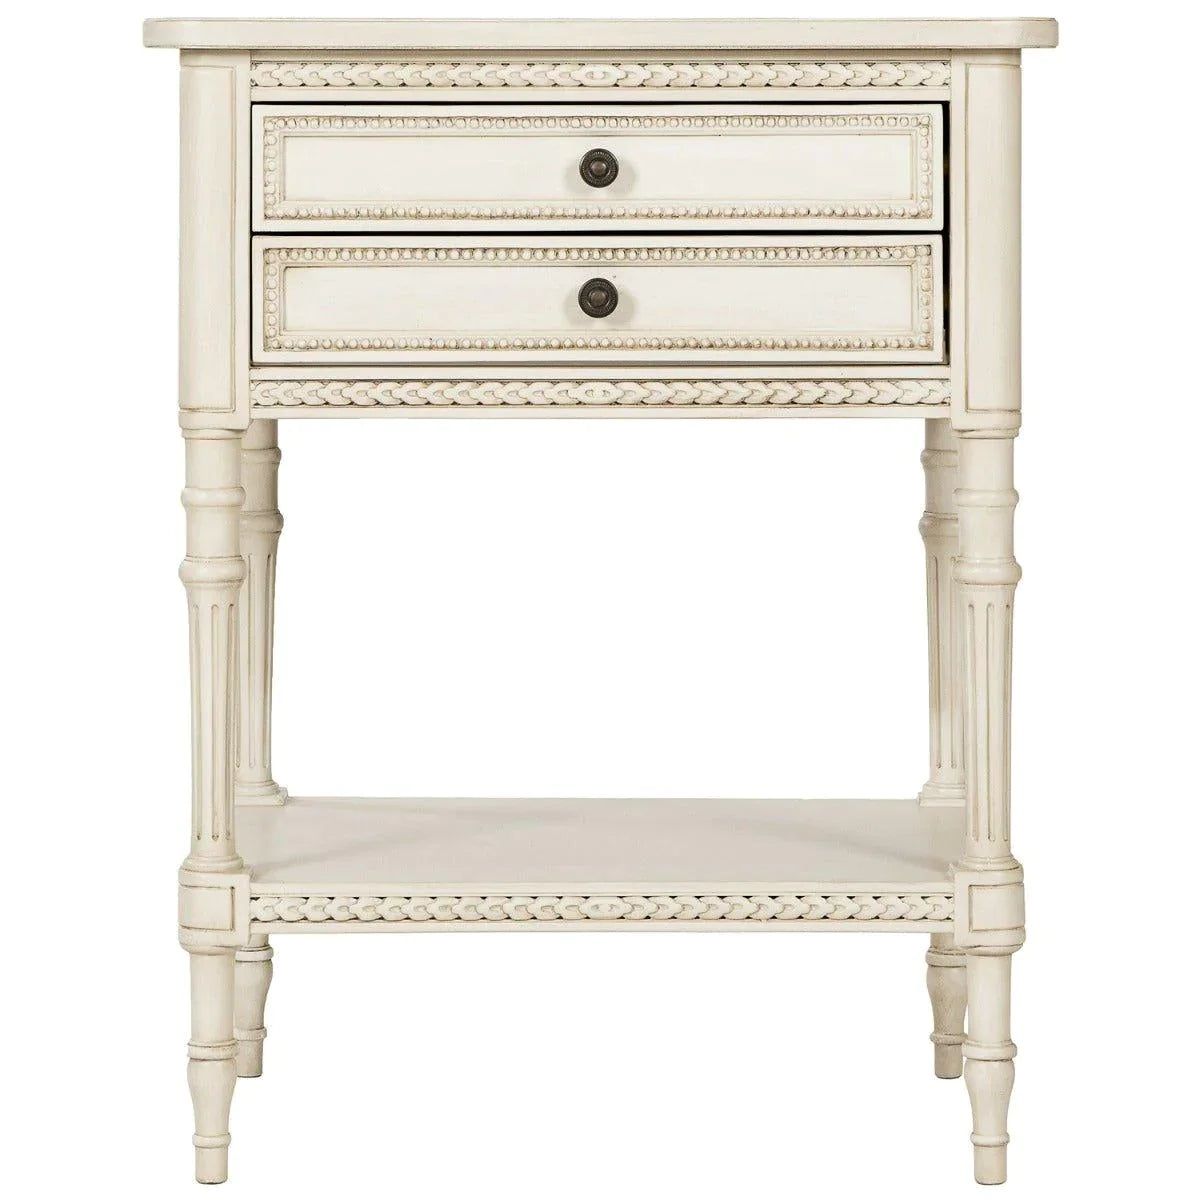 Handmade French Small Two Shelf Side Table with Drawers | The Well Appointed House, LLC